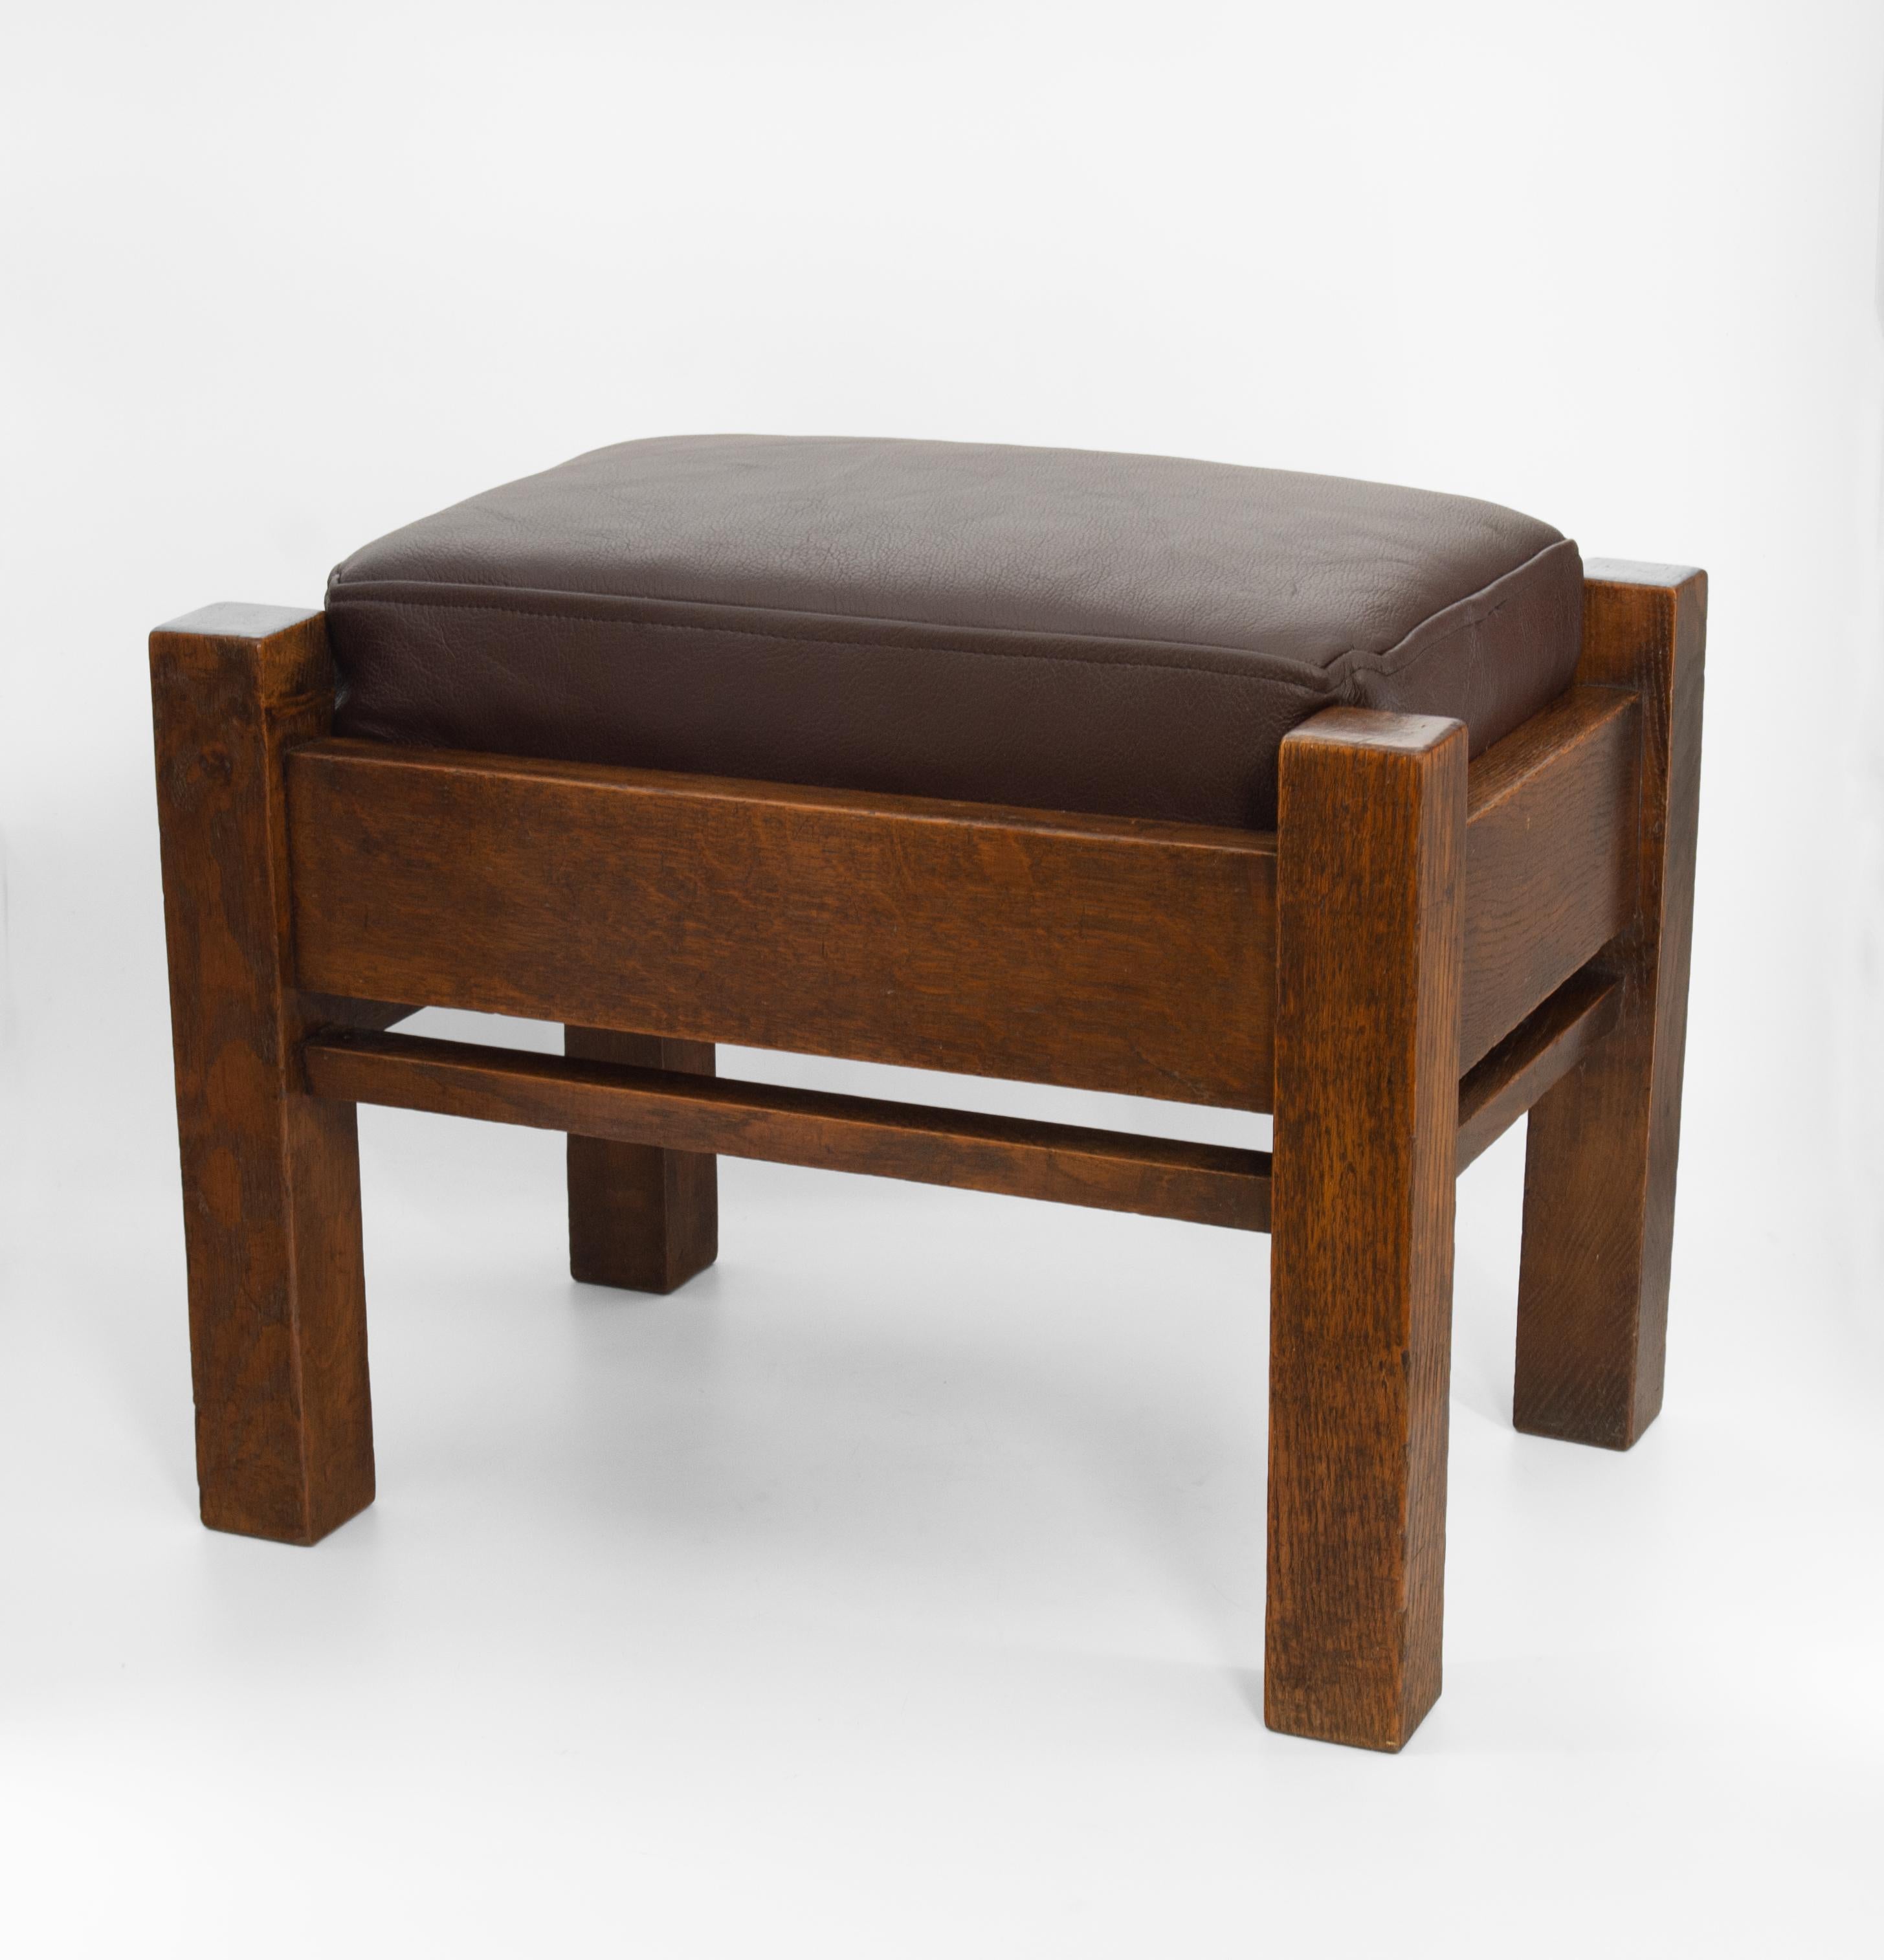 Arts & Crafts oak & leather Mission style footstool by Liberty & Co. The base applied with retailer's plaque 'Liberty Birmingham London & Paris'. Circa 1900.

Delivery included to the mainland UK.
 
The seat pad has a new inner and has been